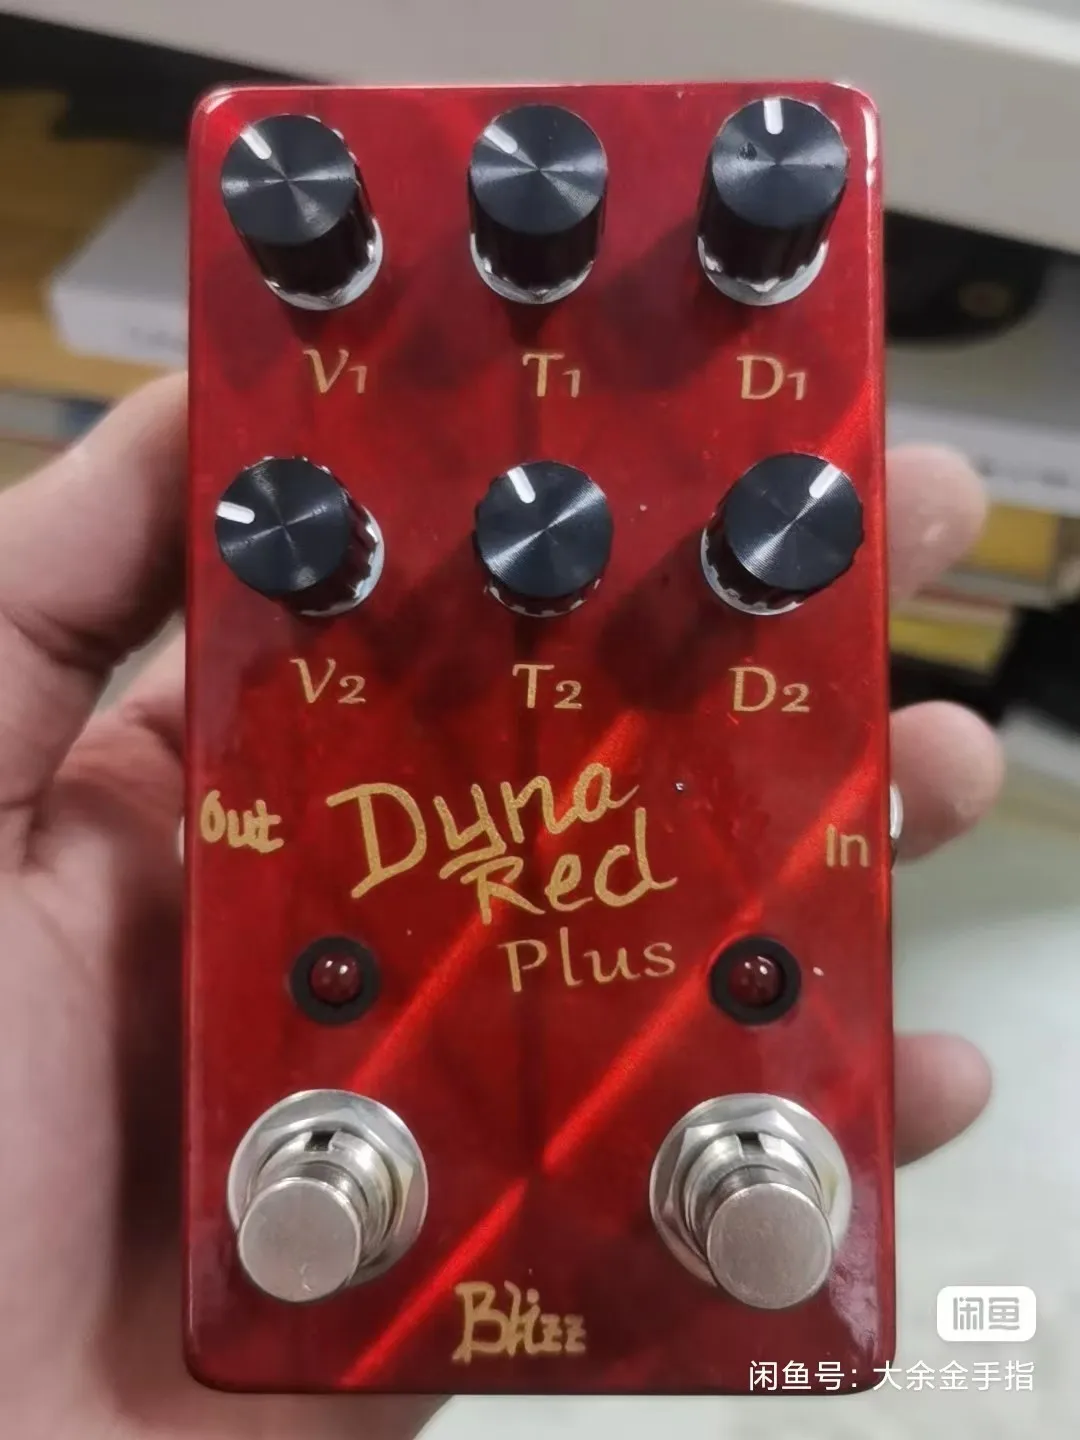 

Mike Dyna Red Plus, Dynamic Red Distortion Single Block Effector Handmade Guitar Pedal